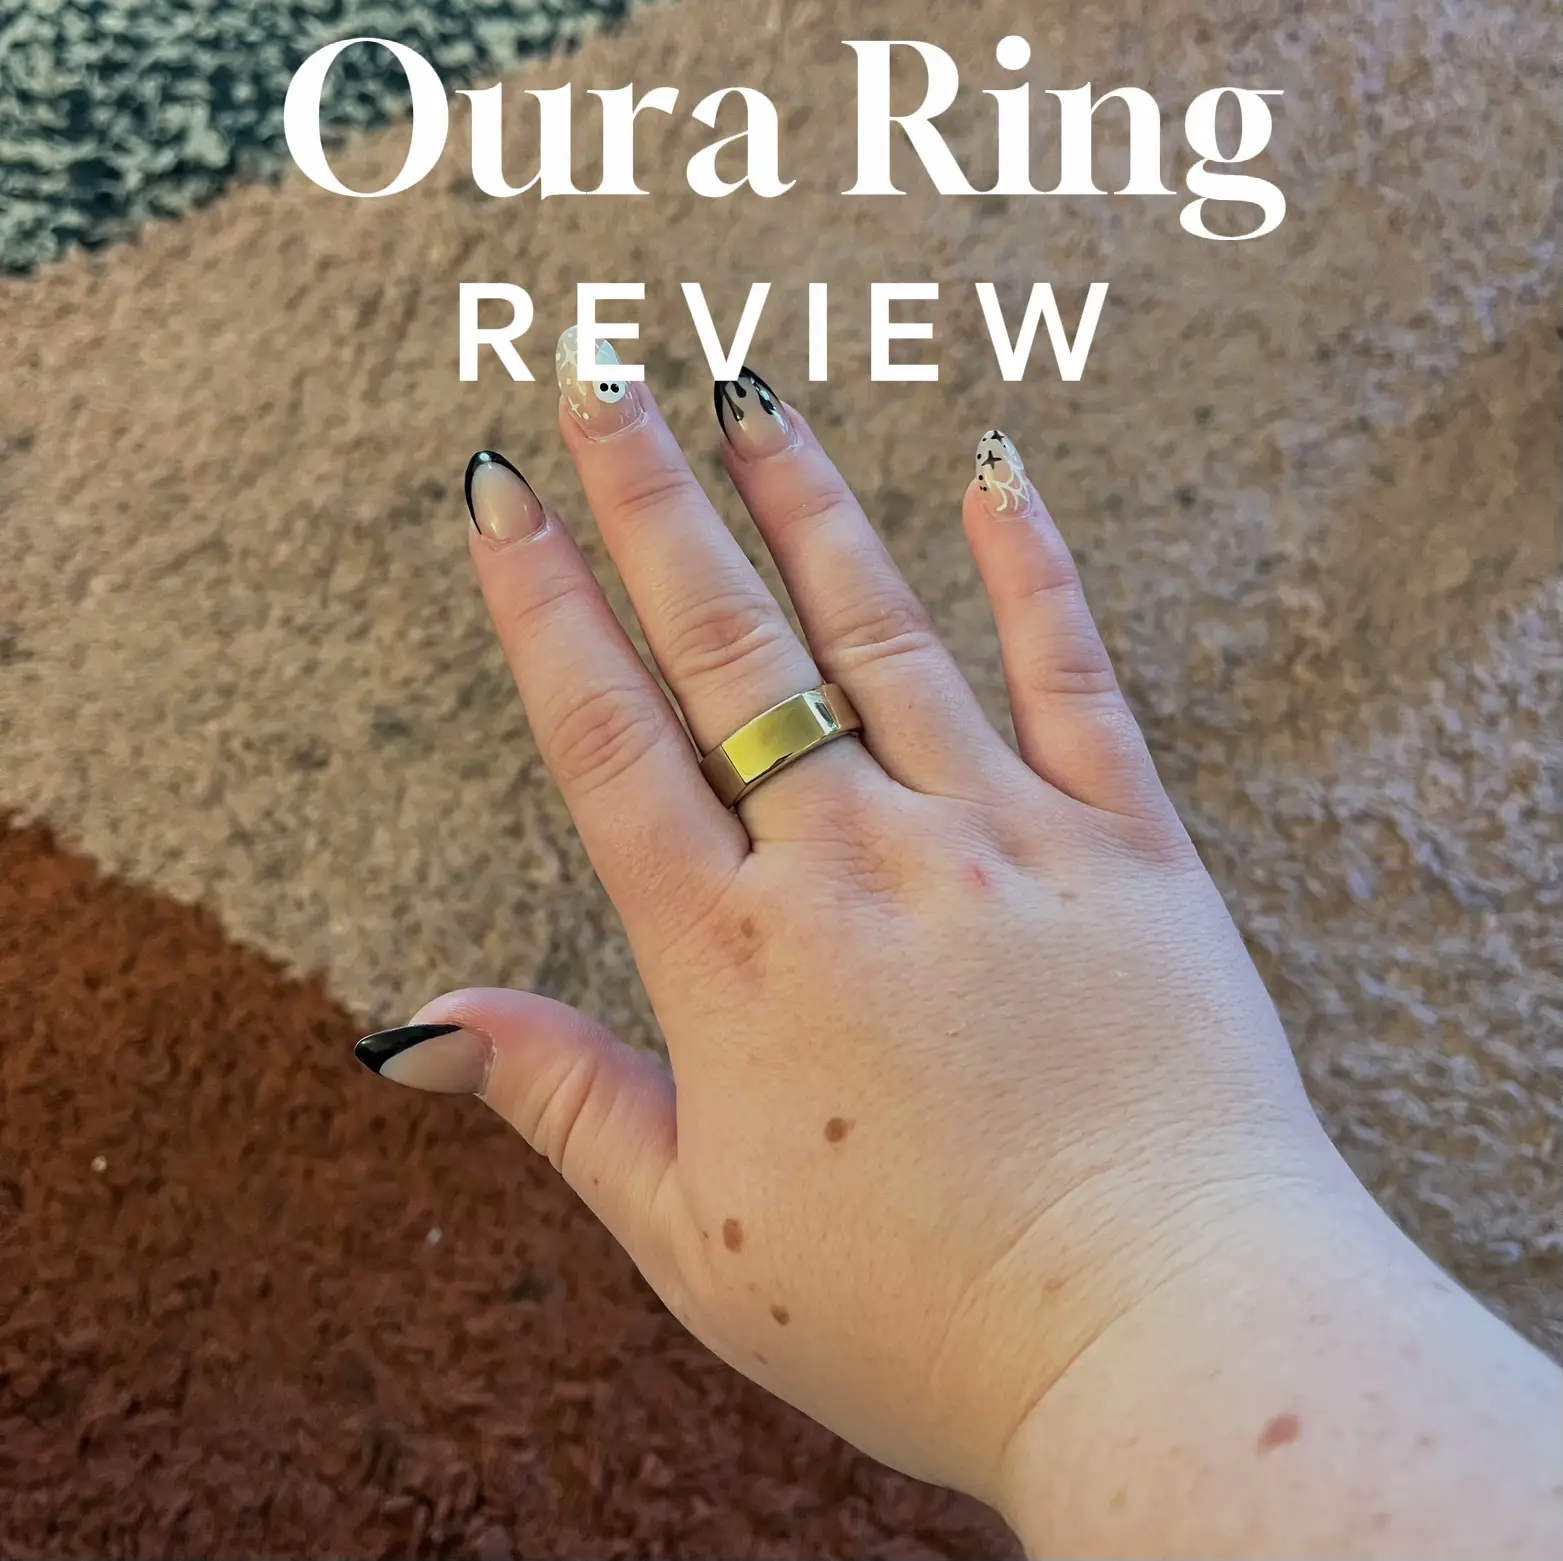 Oura Ring Review After 11 Months: Not Great, But Good Enough